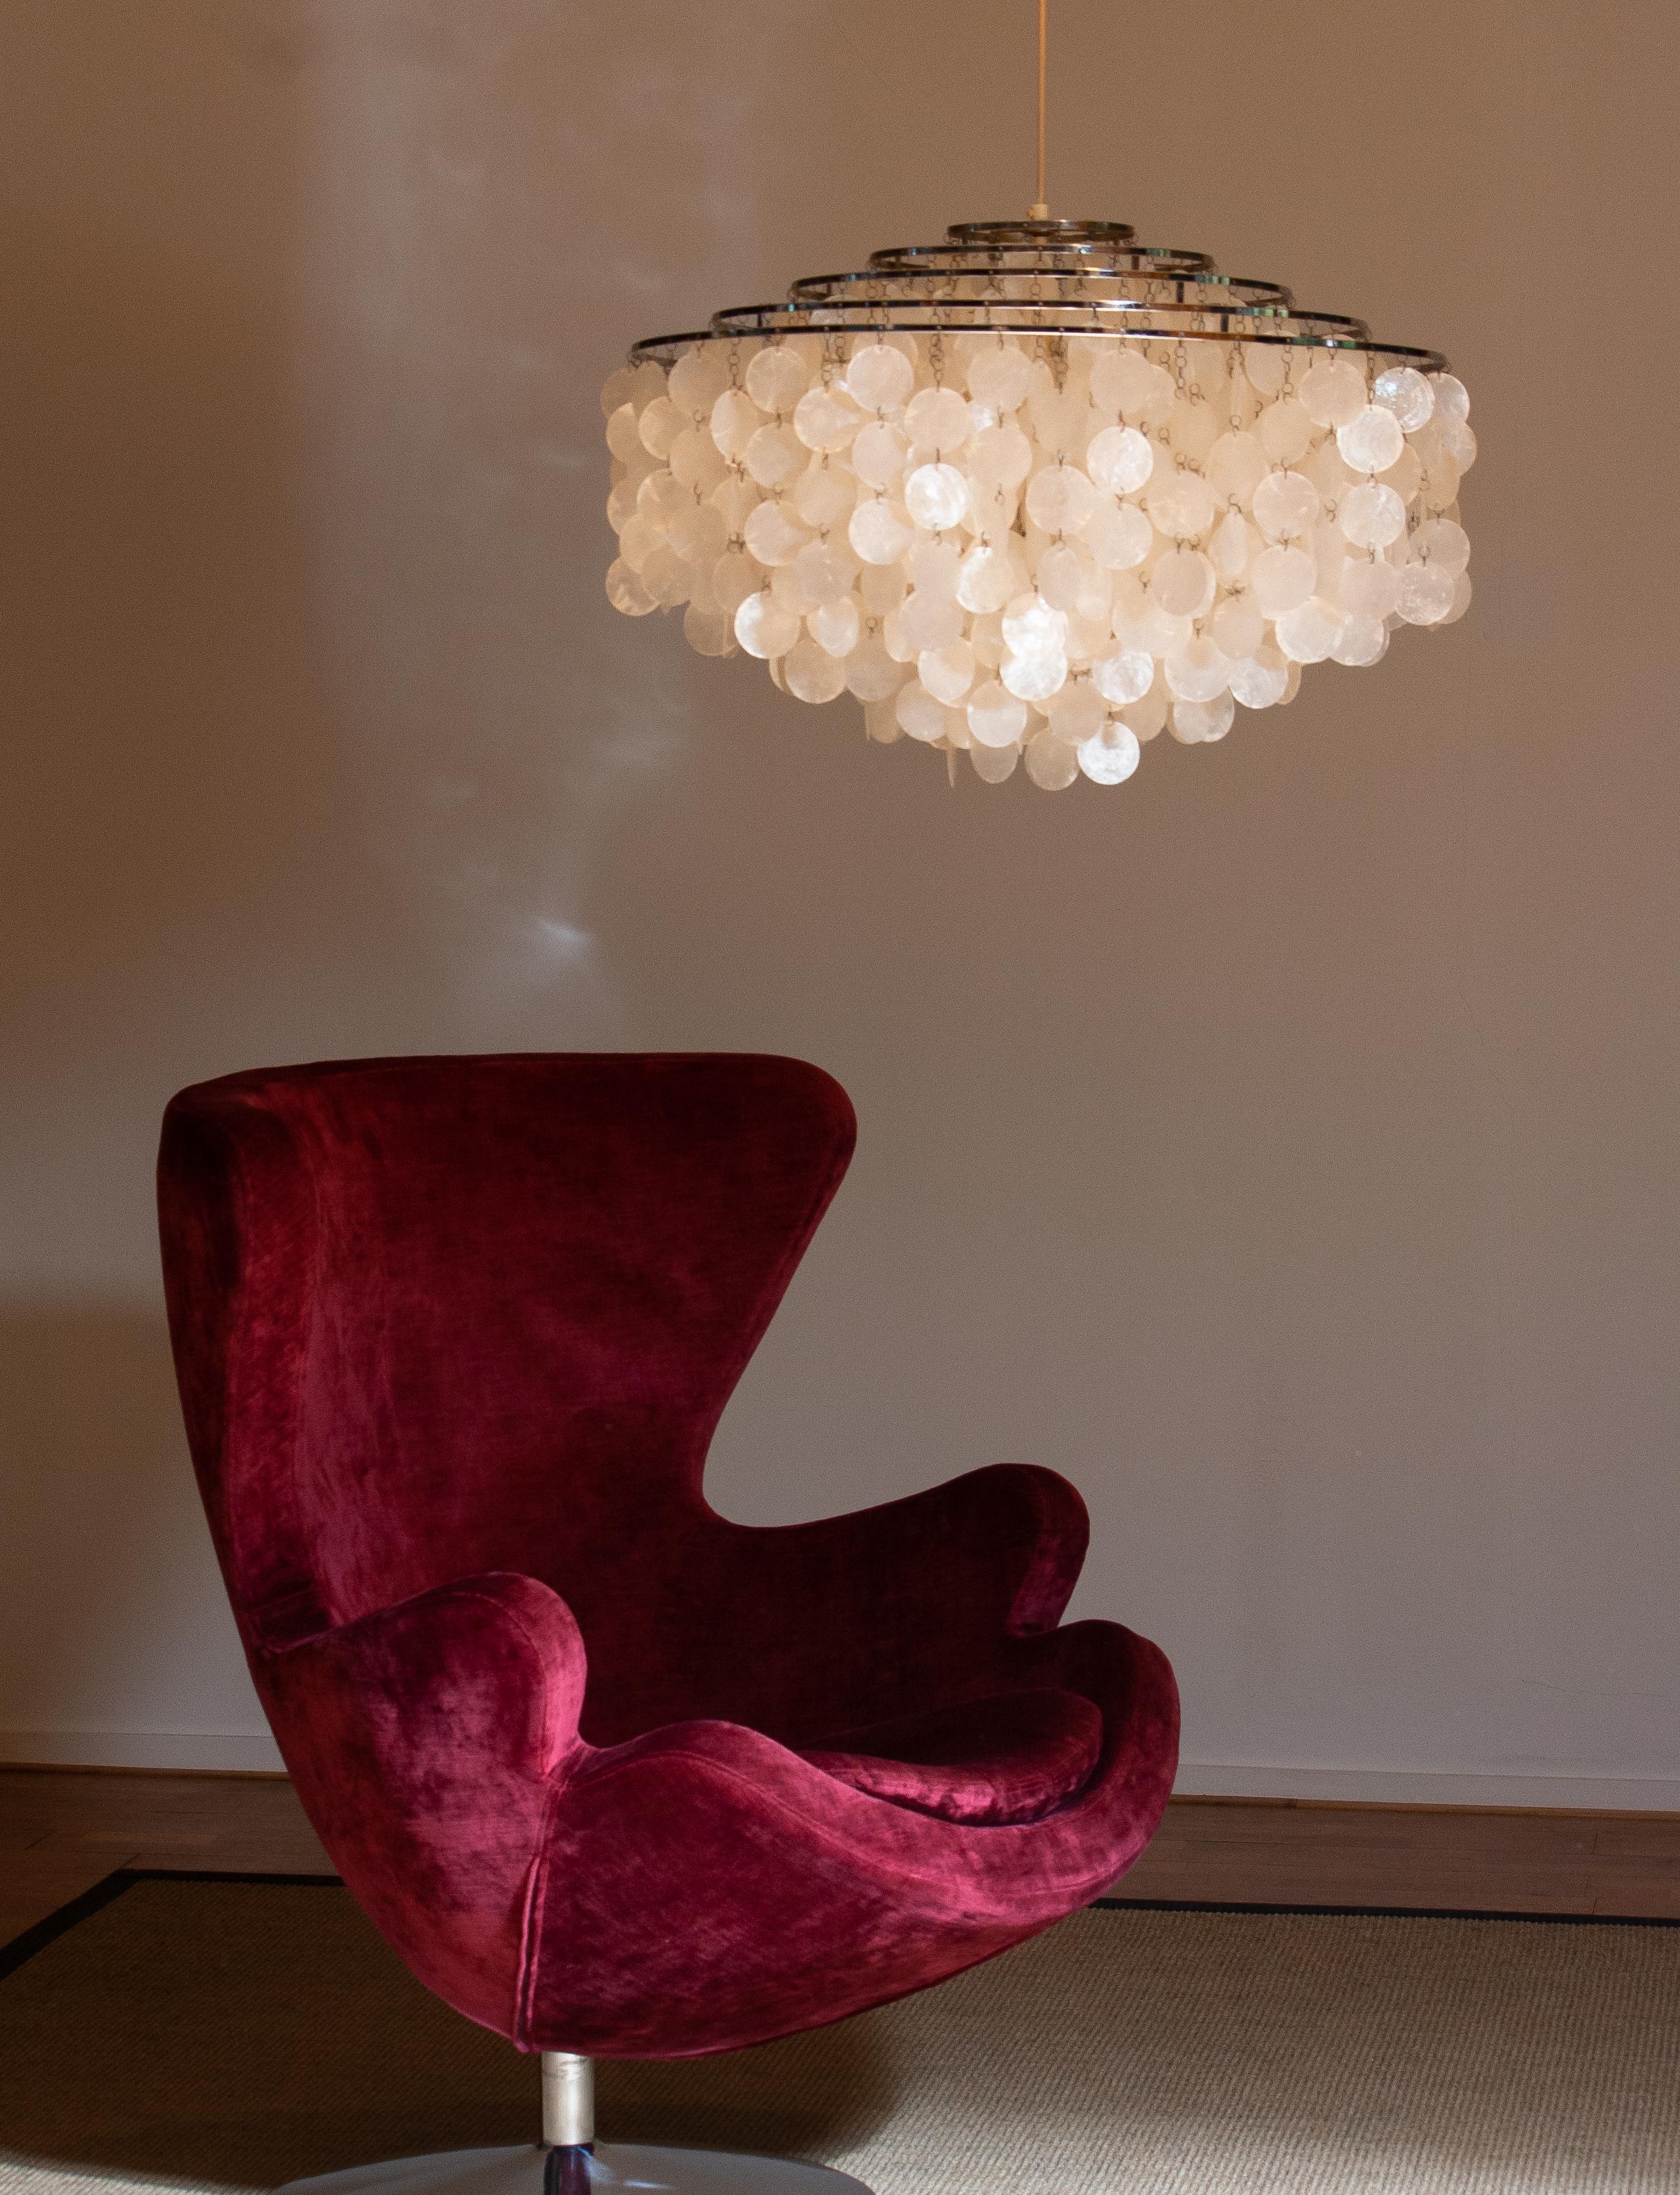 Mid-20th Century 1960s Extra Large Capiz Shell Chandelier by Verner Panton for Luber AG. Swiss